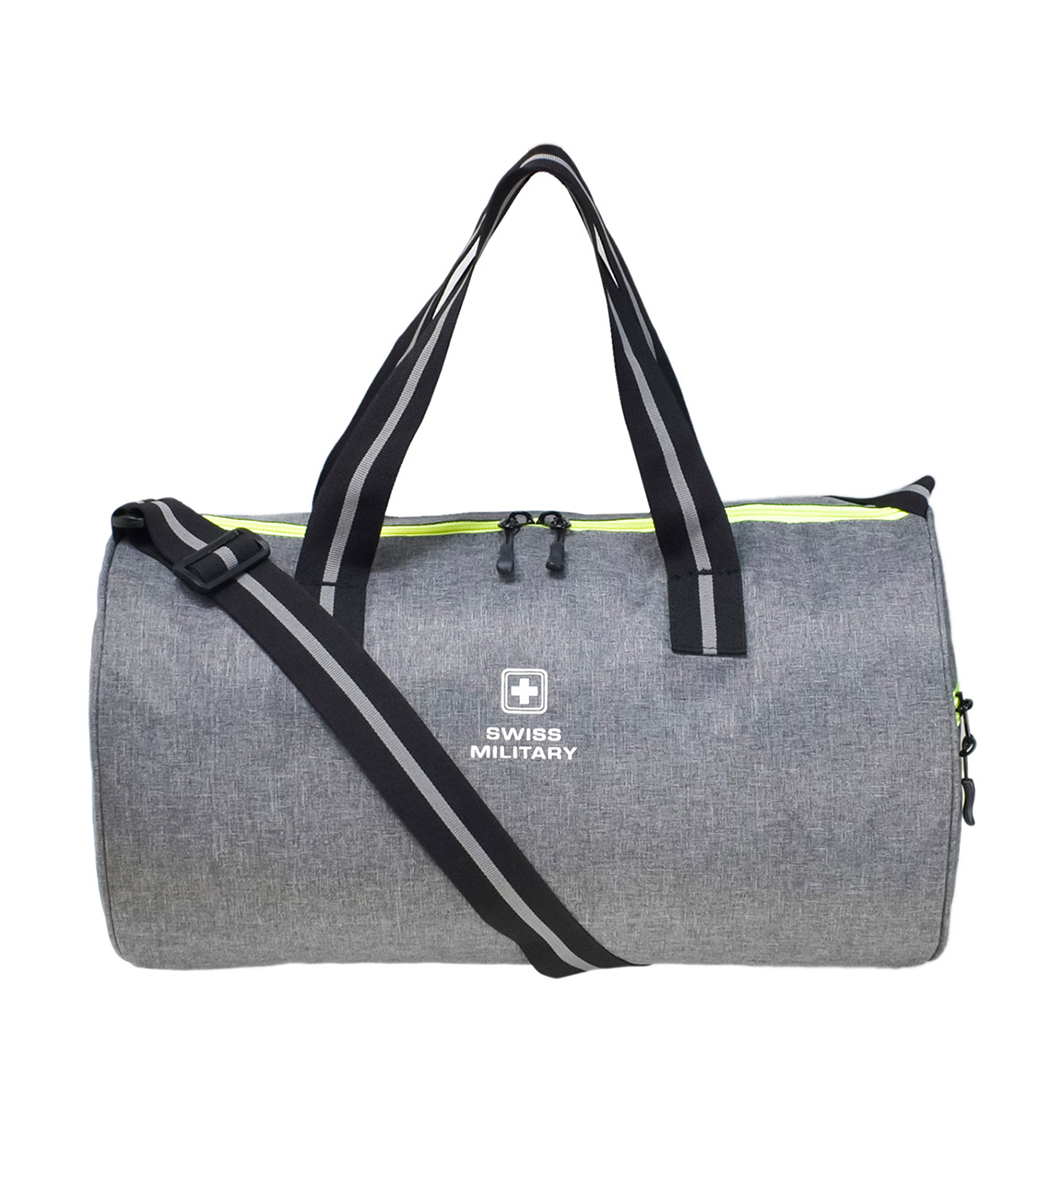 Share 83+ high quality duffle bag - in.cdgdbentre